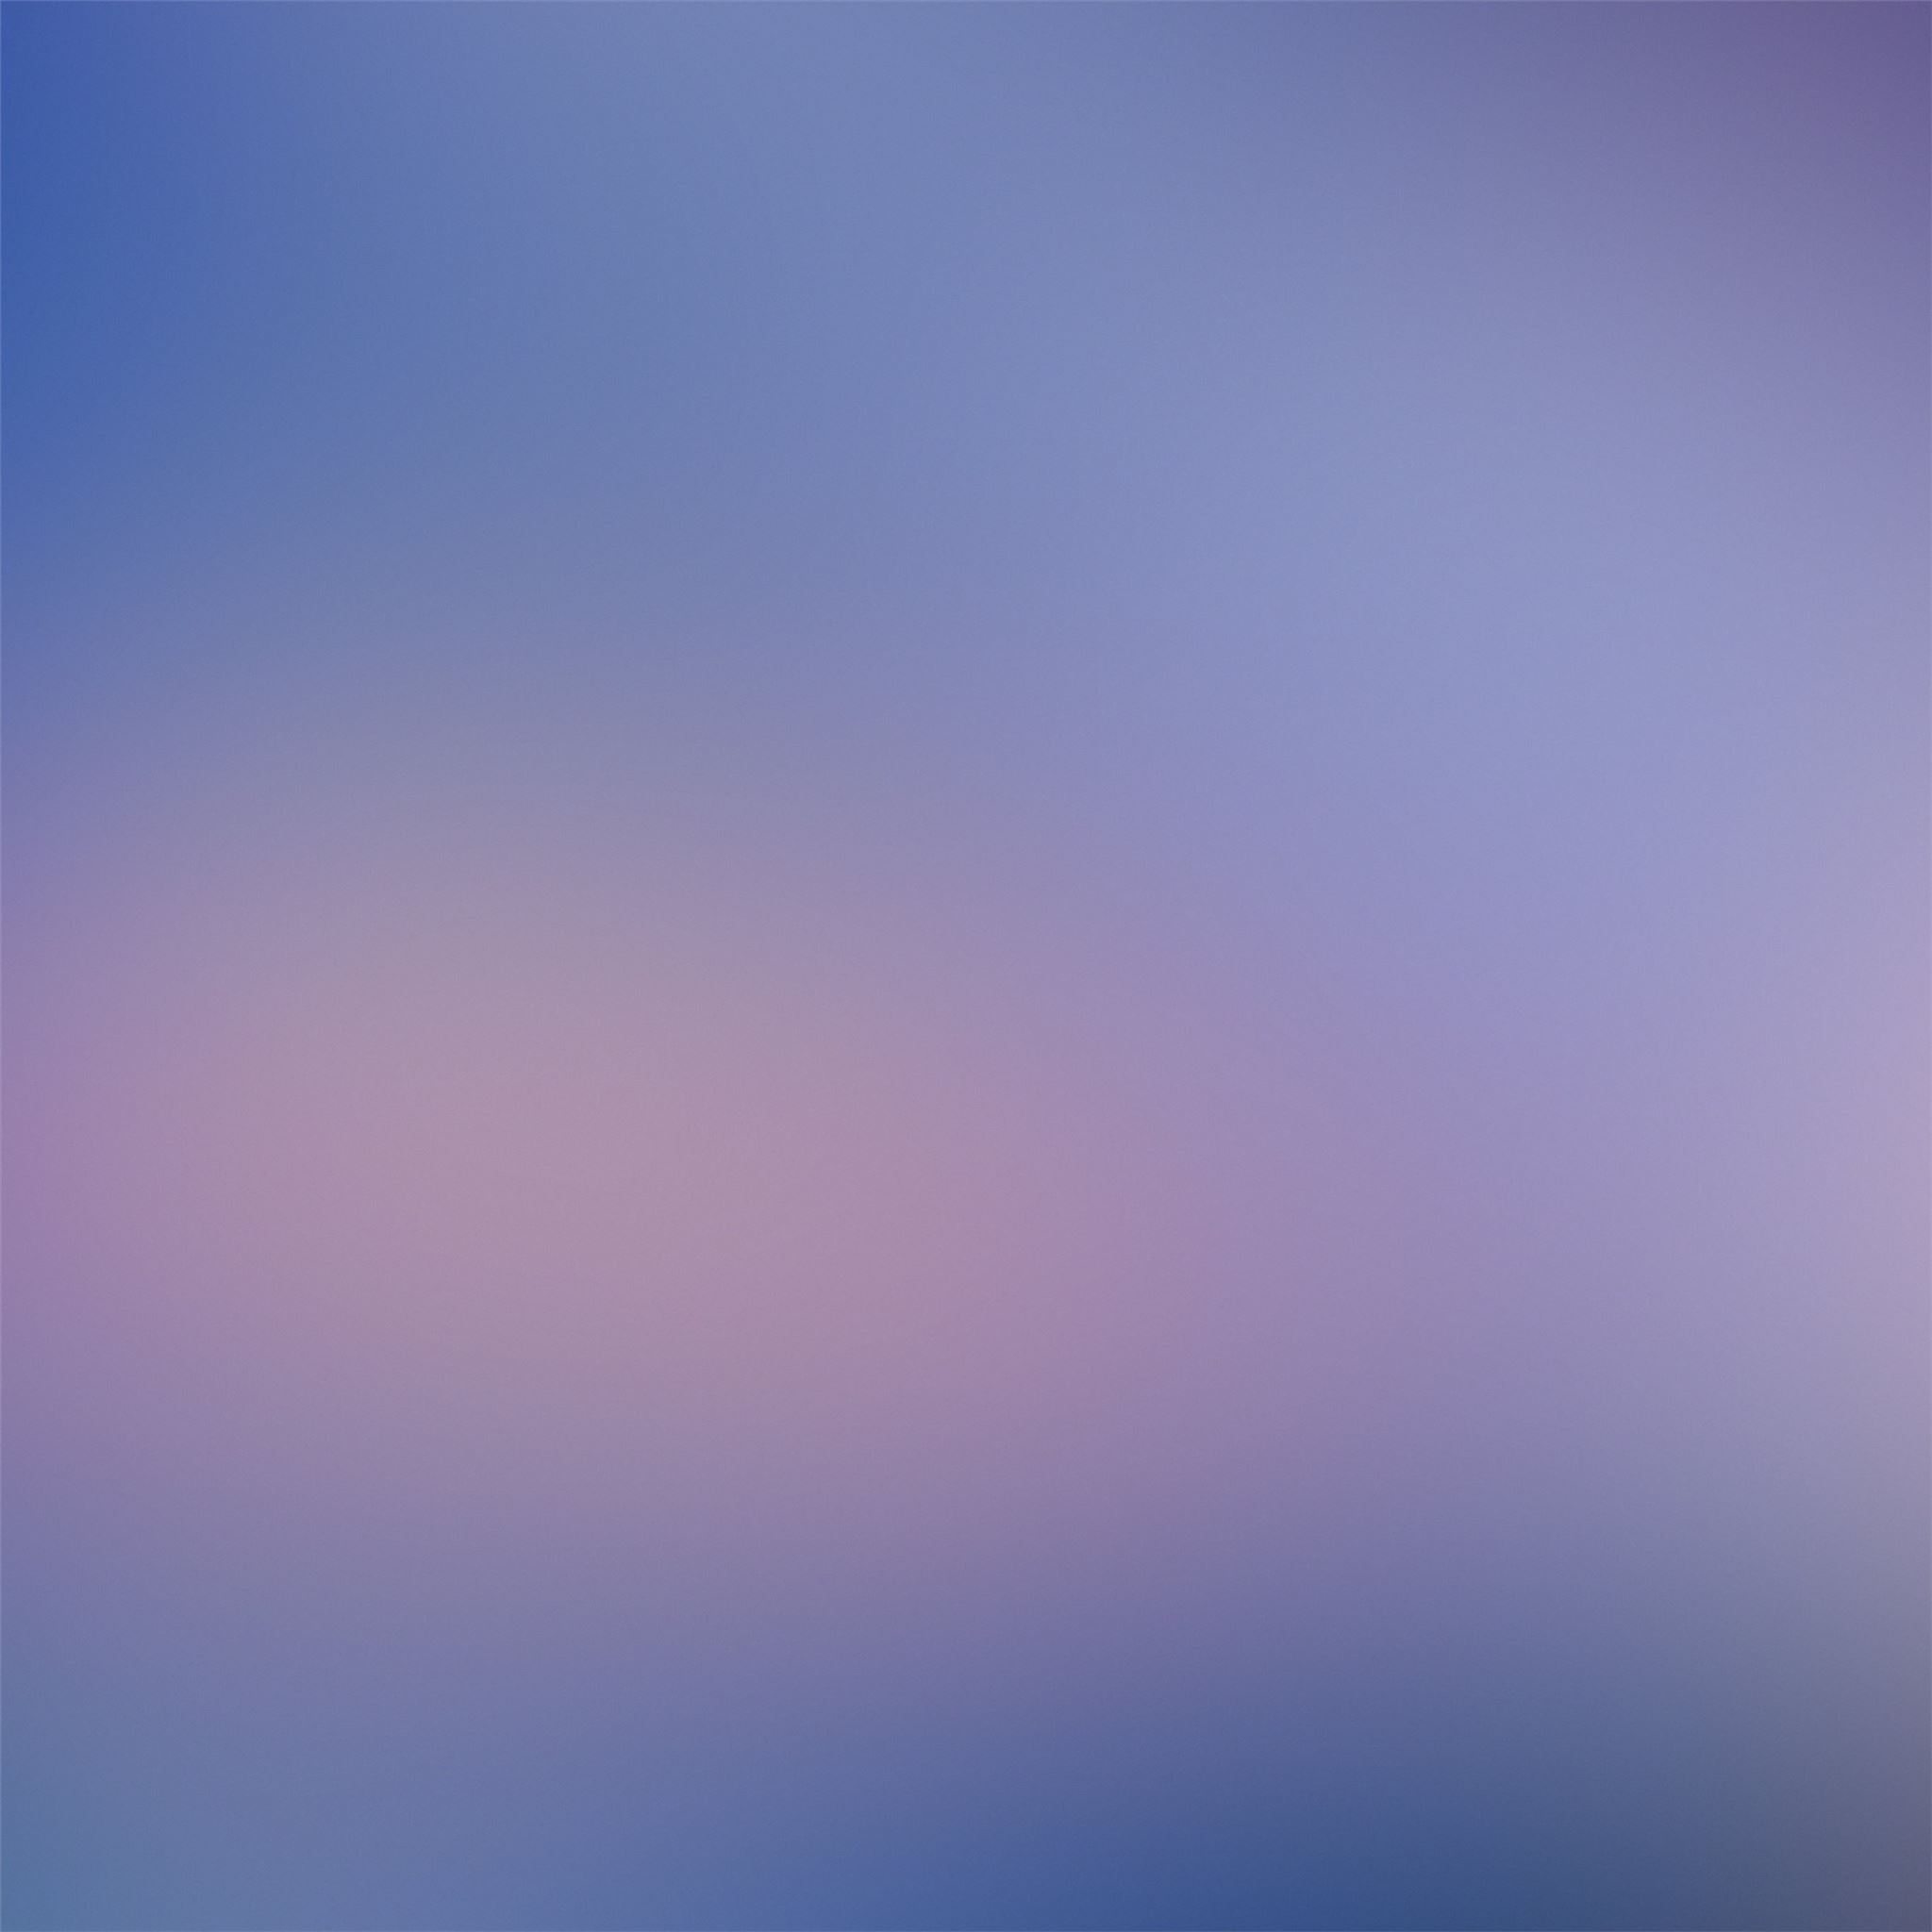 peaceful blur background iPad Air Wallpapers Free Download